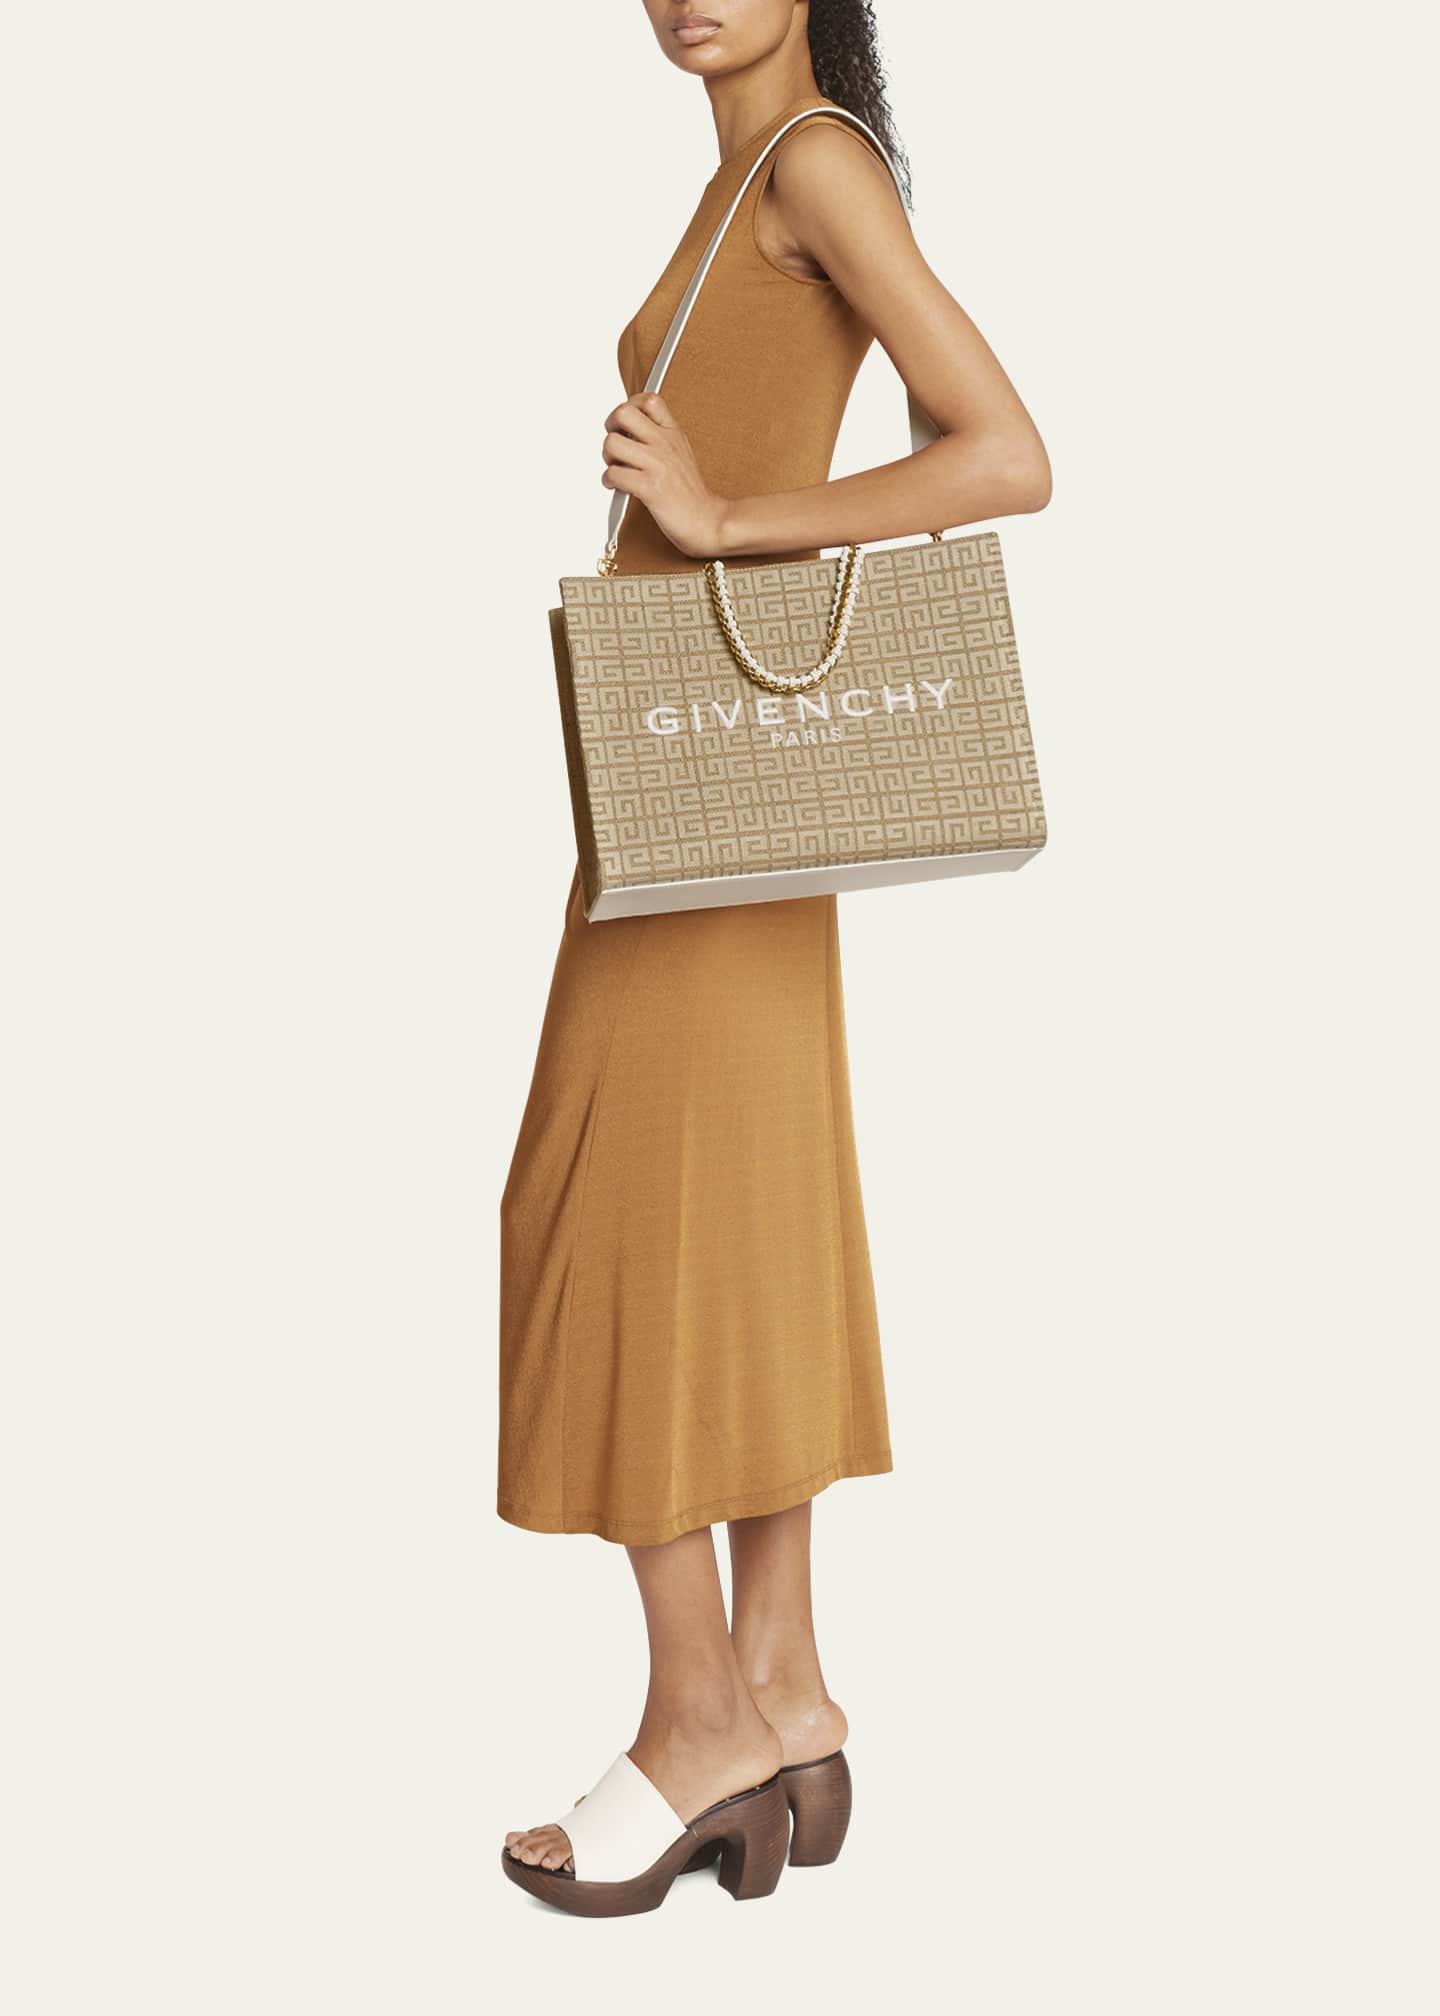 Women's G Canvas Tote Bag by Givenchy